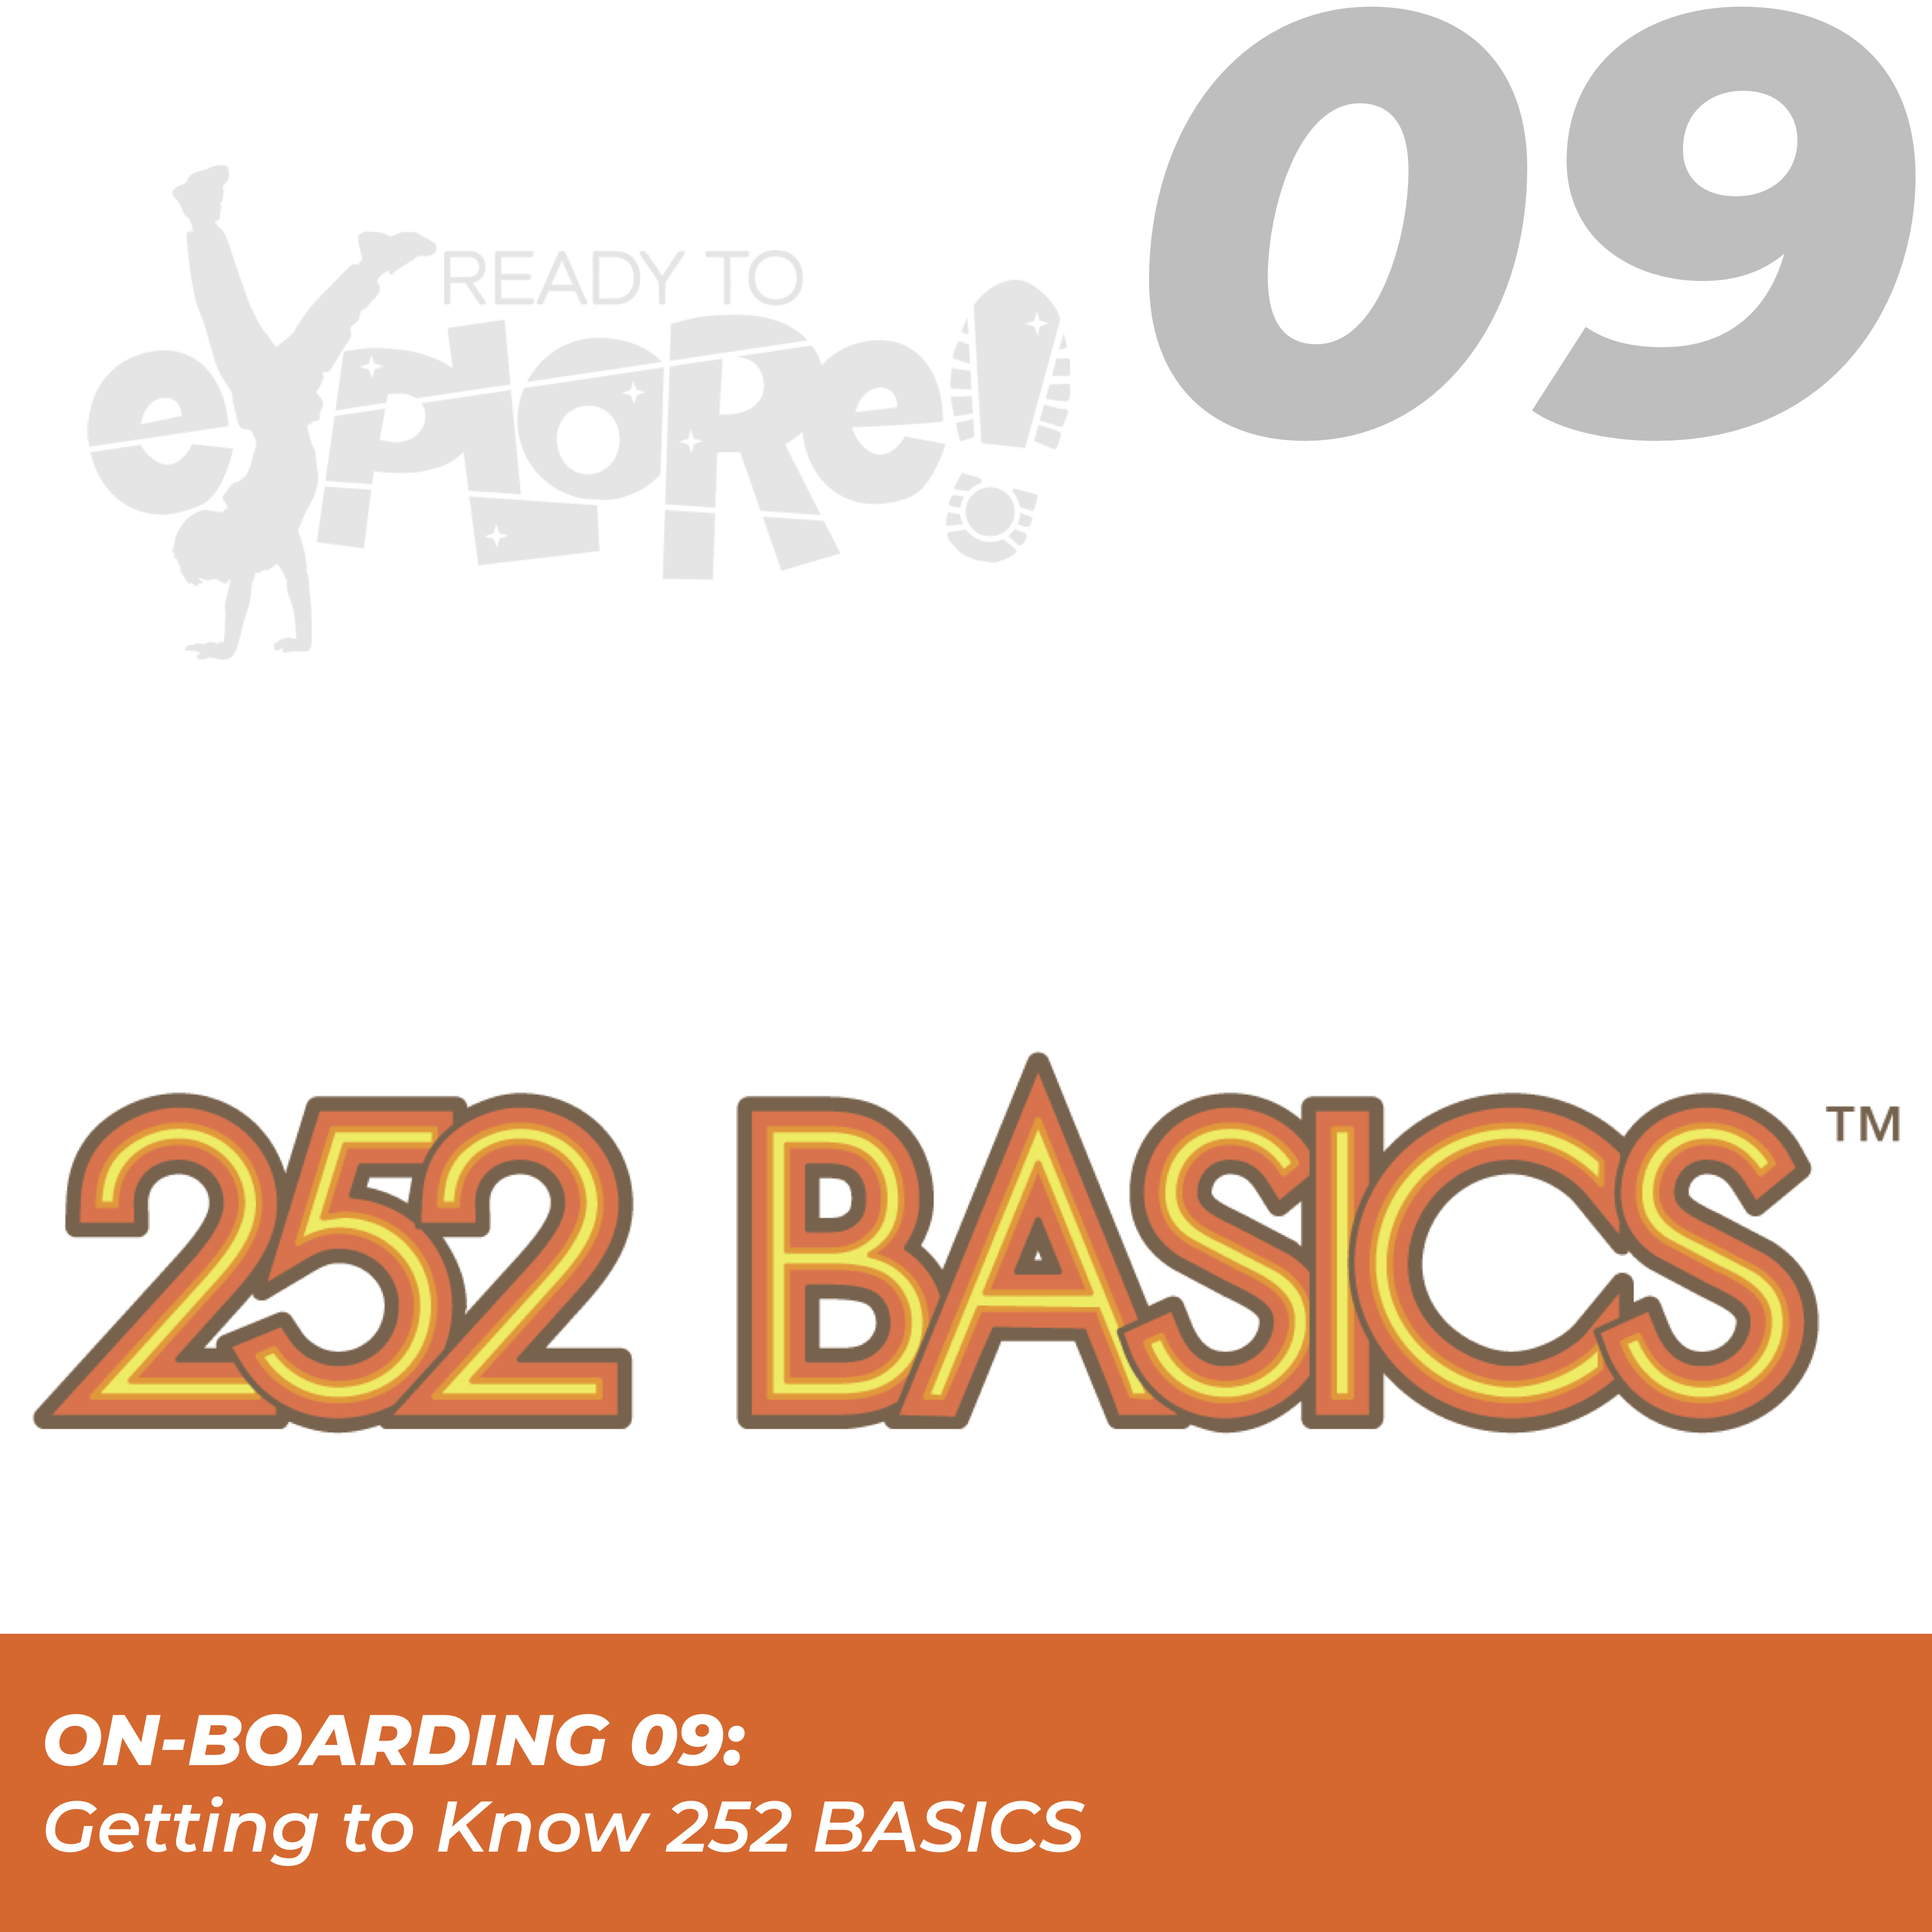 Click here for On-boarding 09: Getting to know 252 Basics